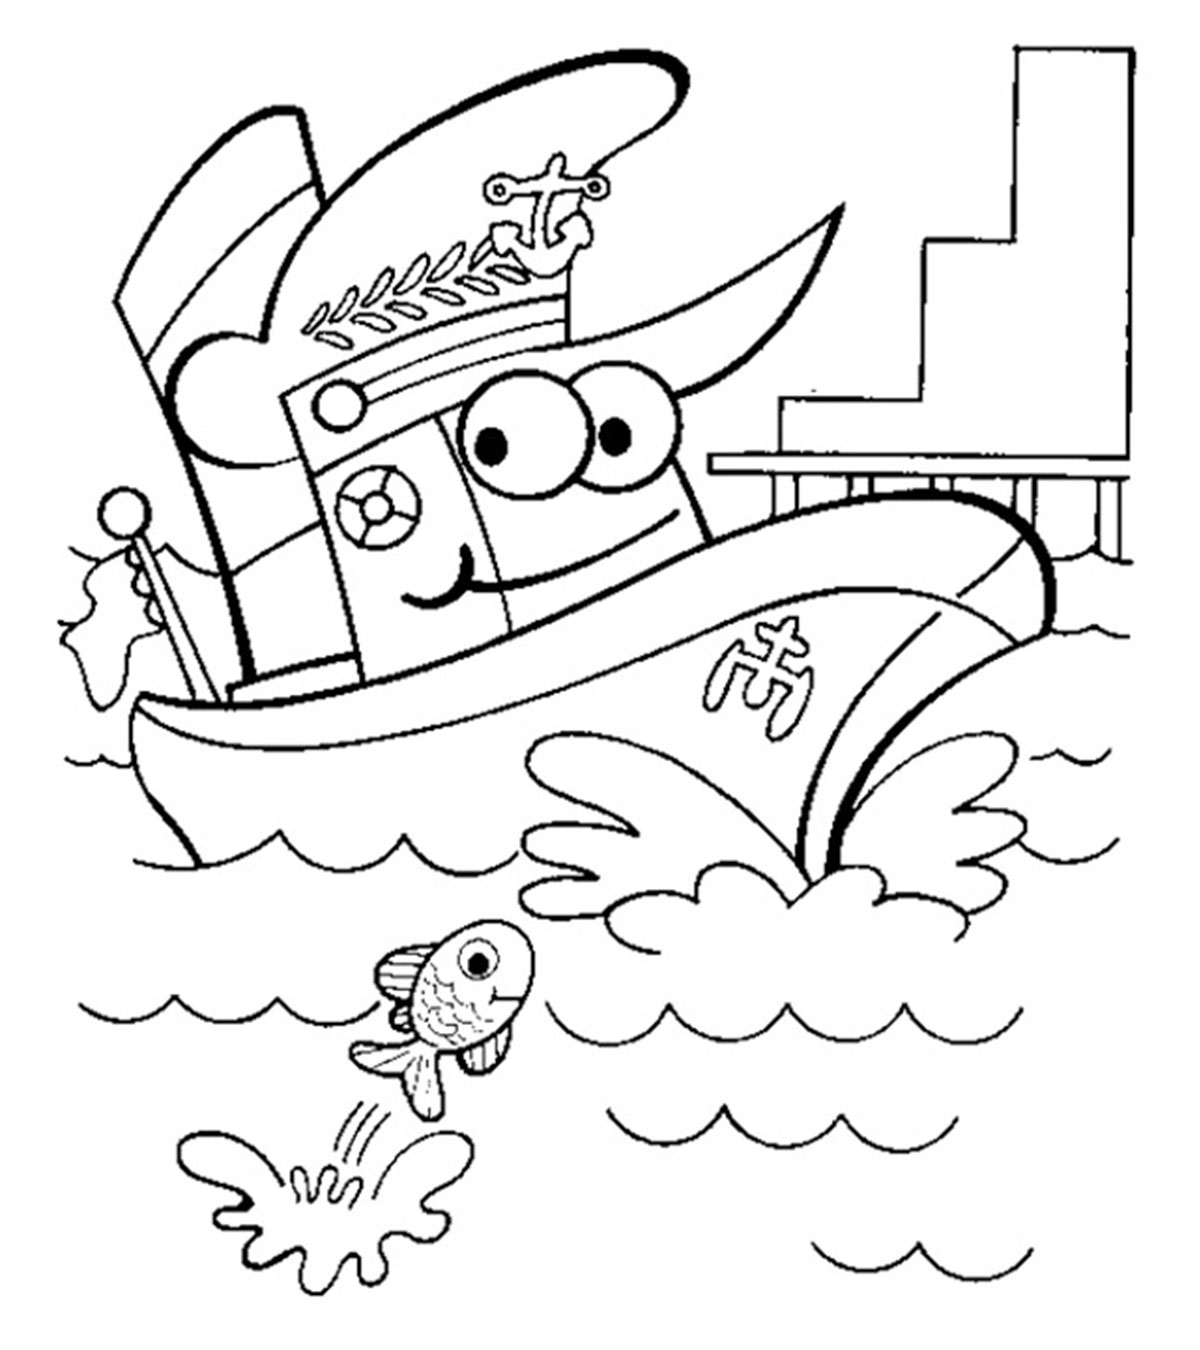 10 Best Boats And Ships Coloring Pages For Your Little Ones_image